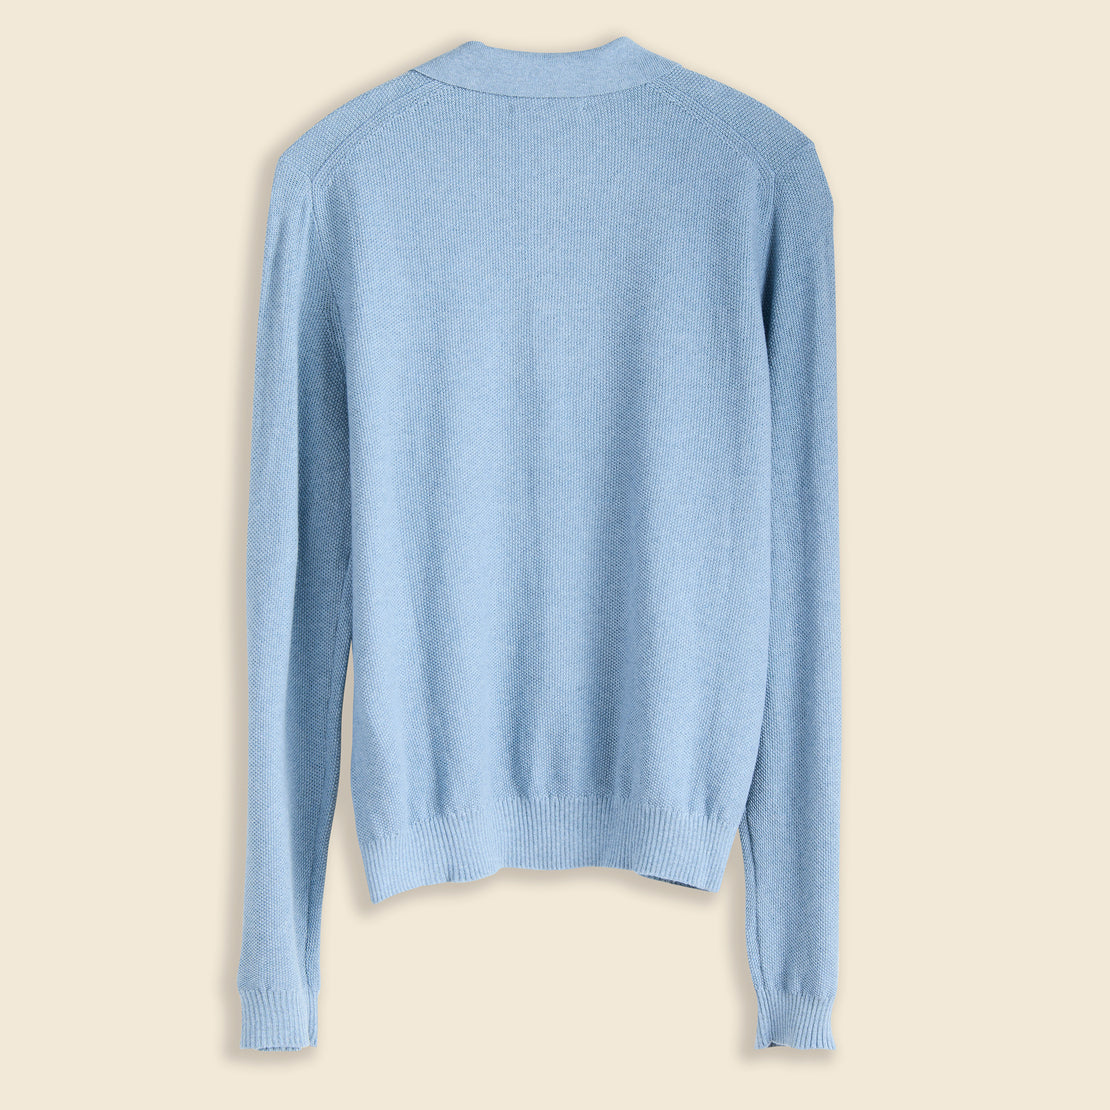 Alice Polo Sweater - Washed Indigo - Alex Mill - STAG Provisions - W - Tops - Sweater